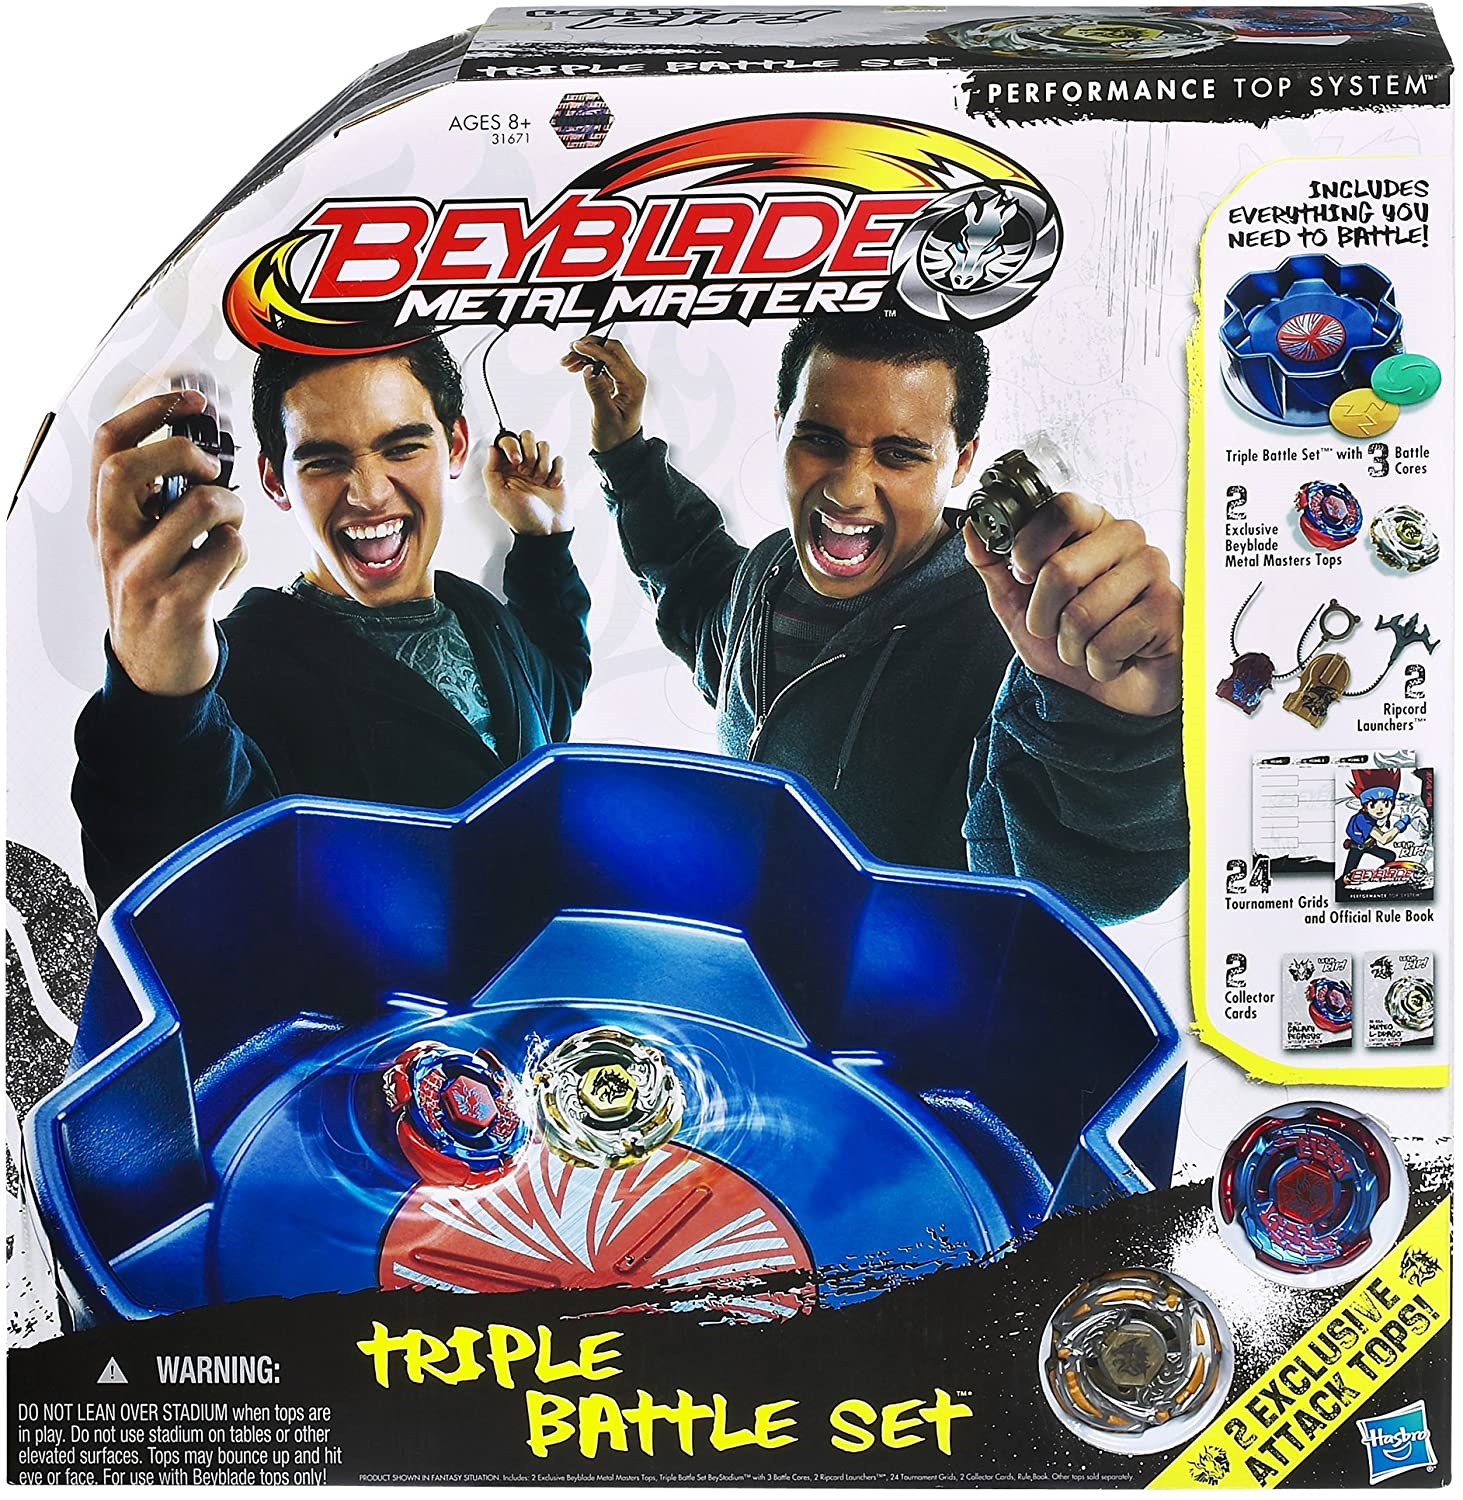 https://static.wikia.nocookie.net/beyblade/images/e/e5/TripleBattleSet.png/revision/latest?cb=20210210062648